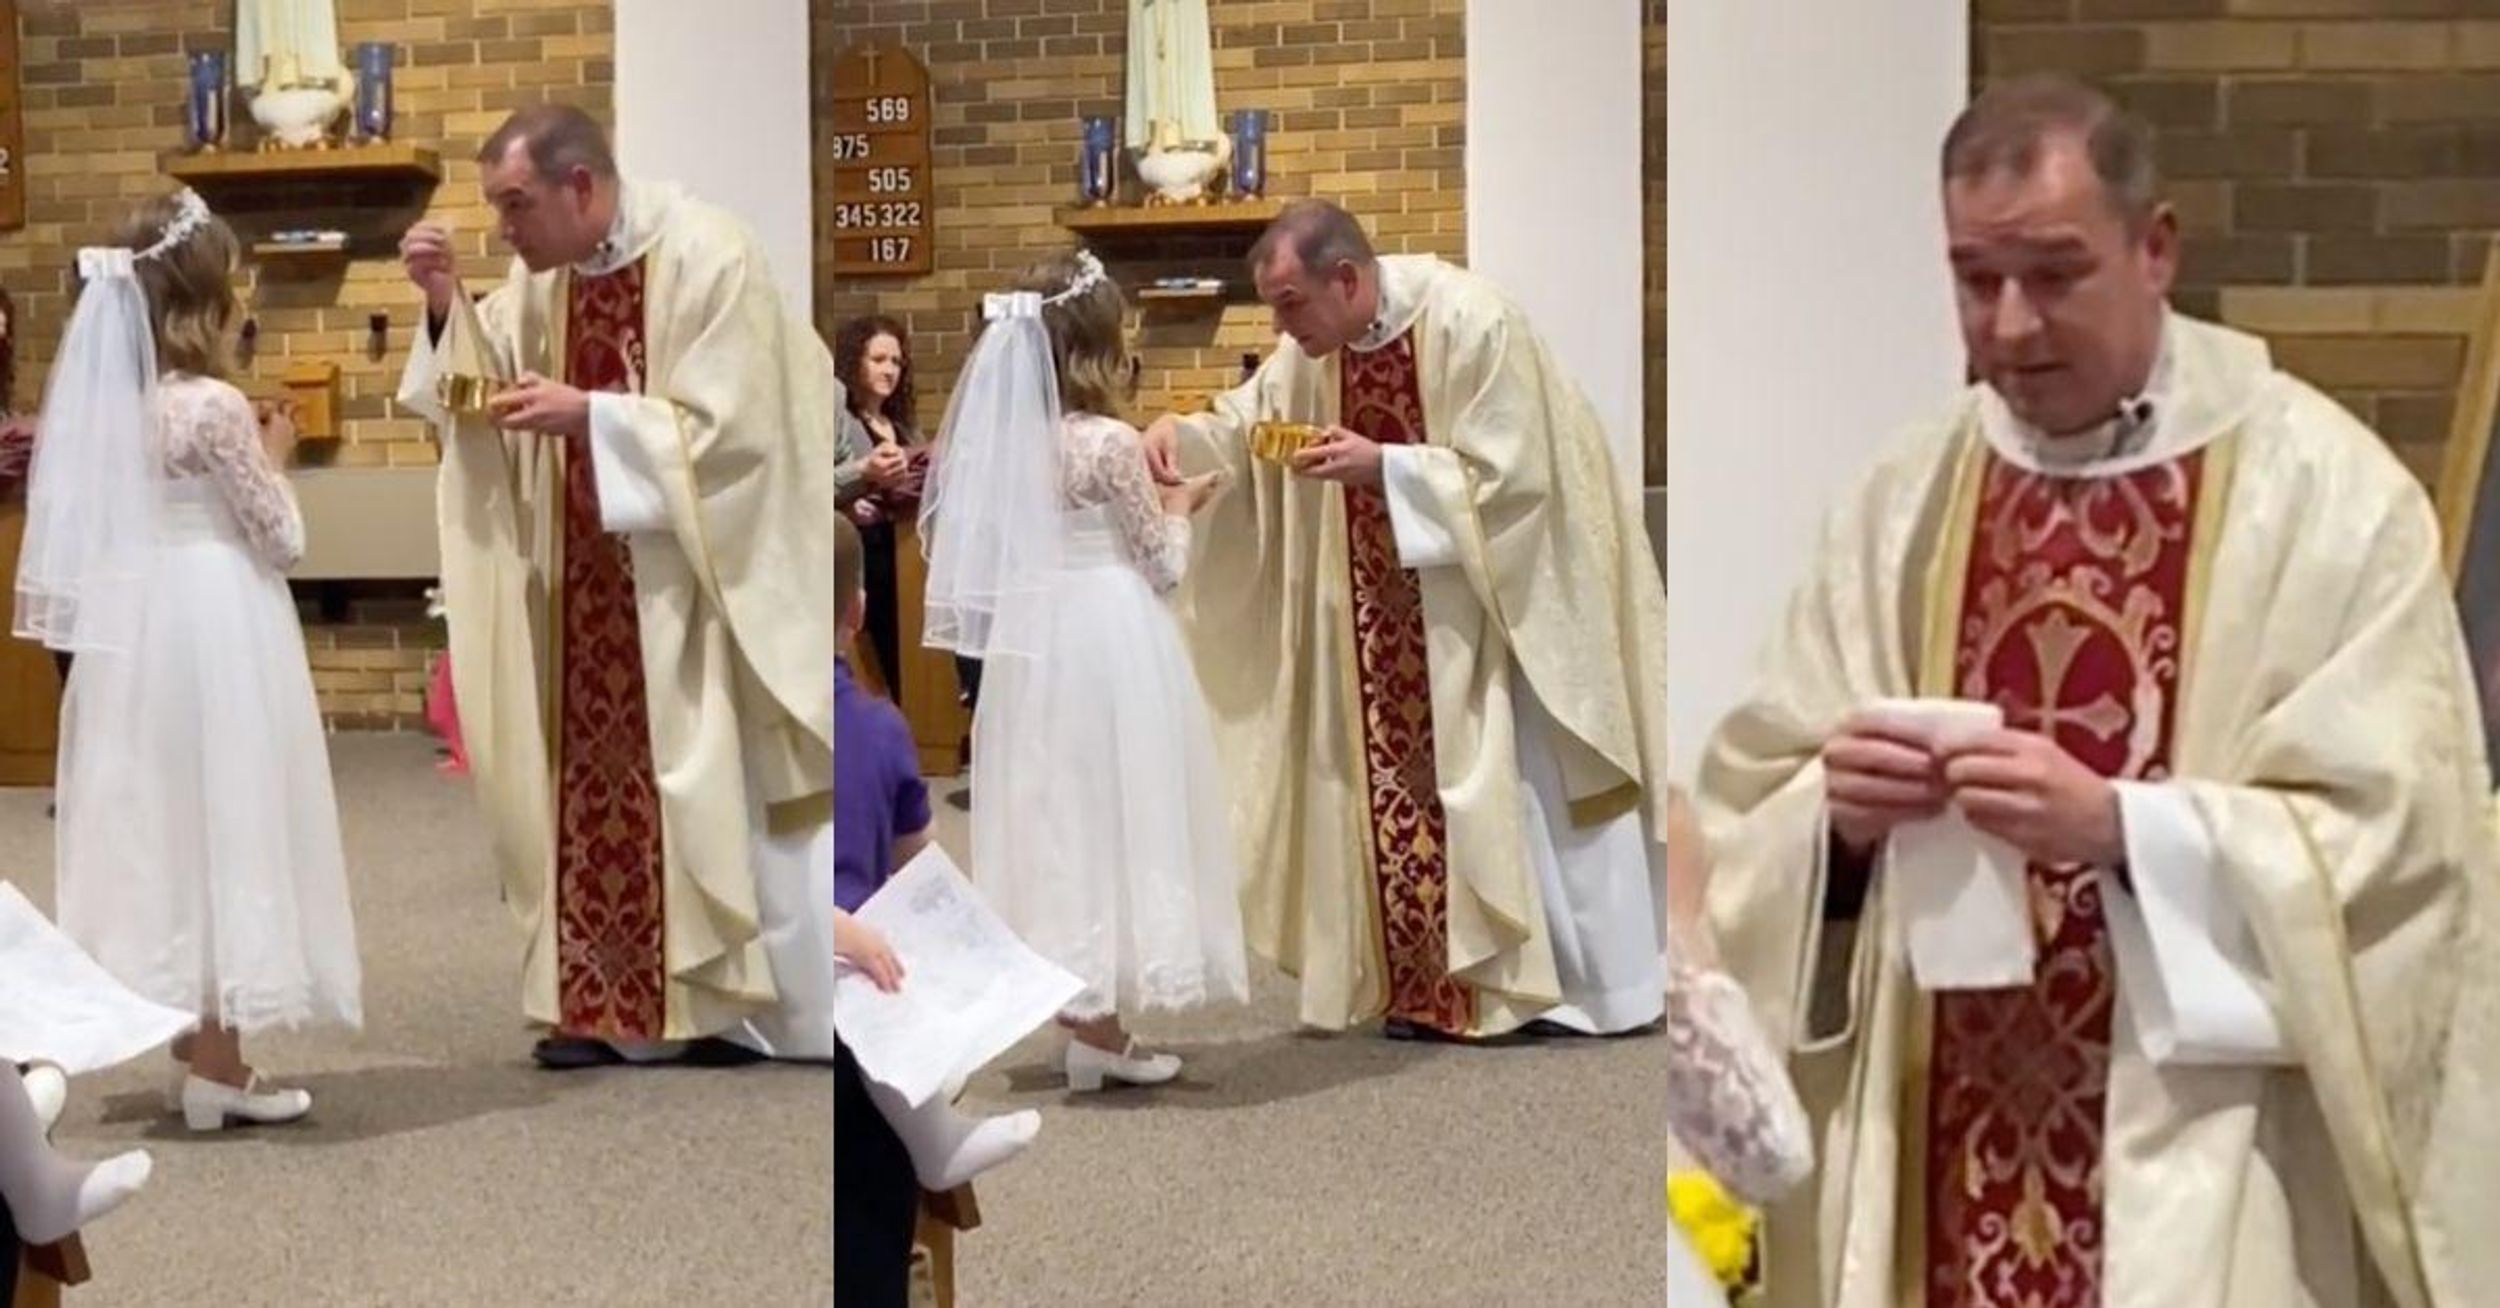 7-Year-Old Girl Is Instant TikTok Legend After Chugging Wine Like A Pro At Her First Communion